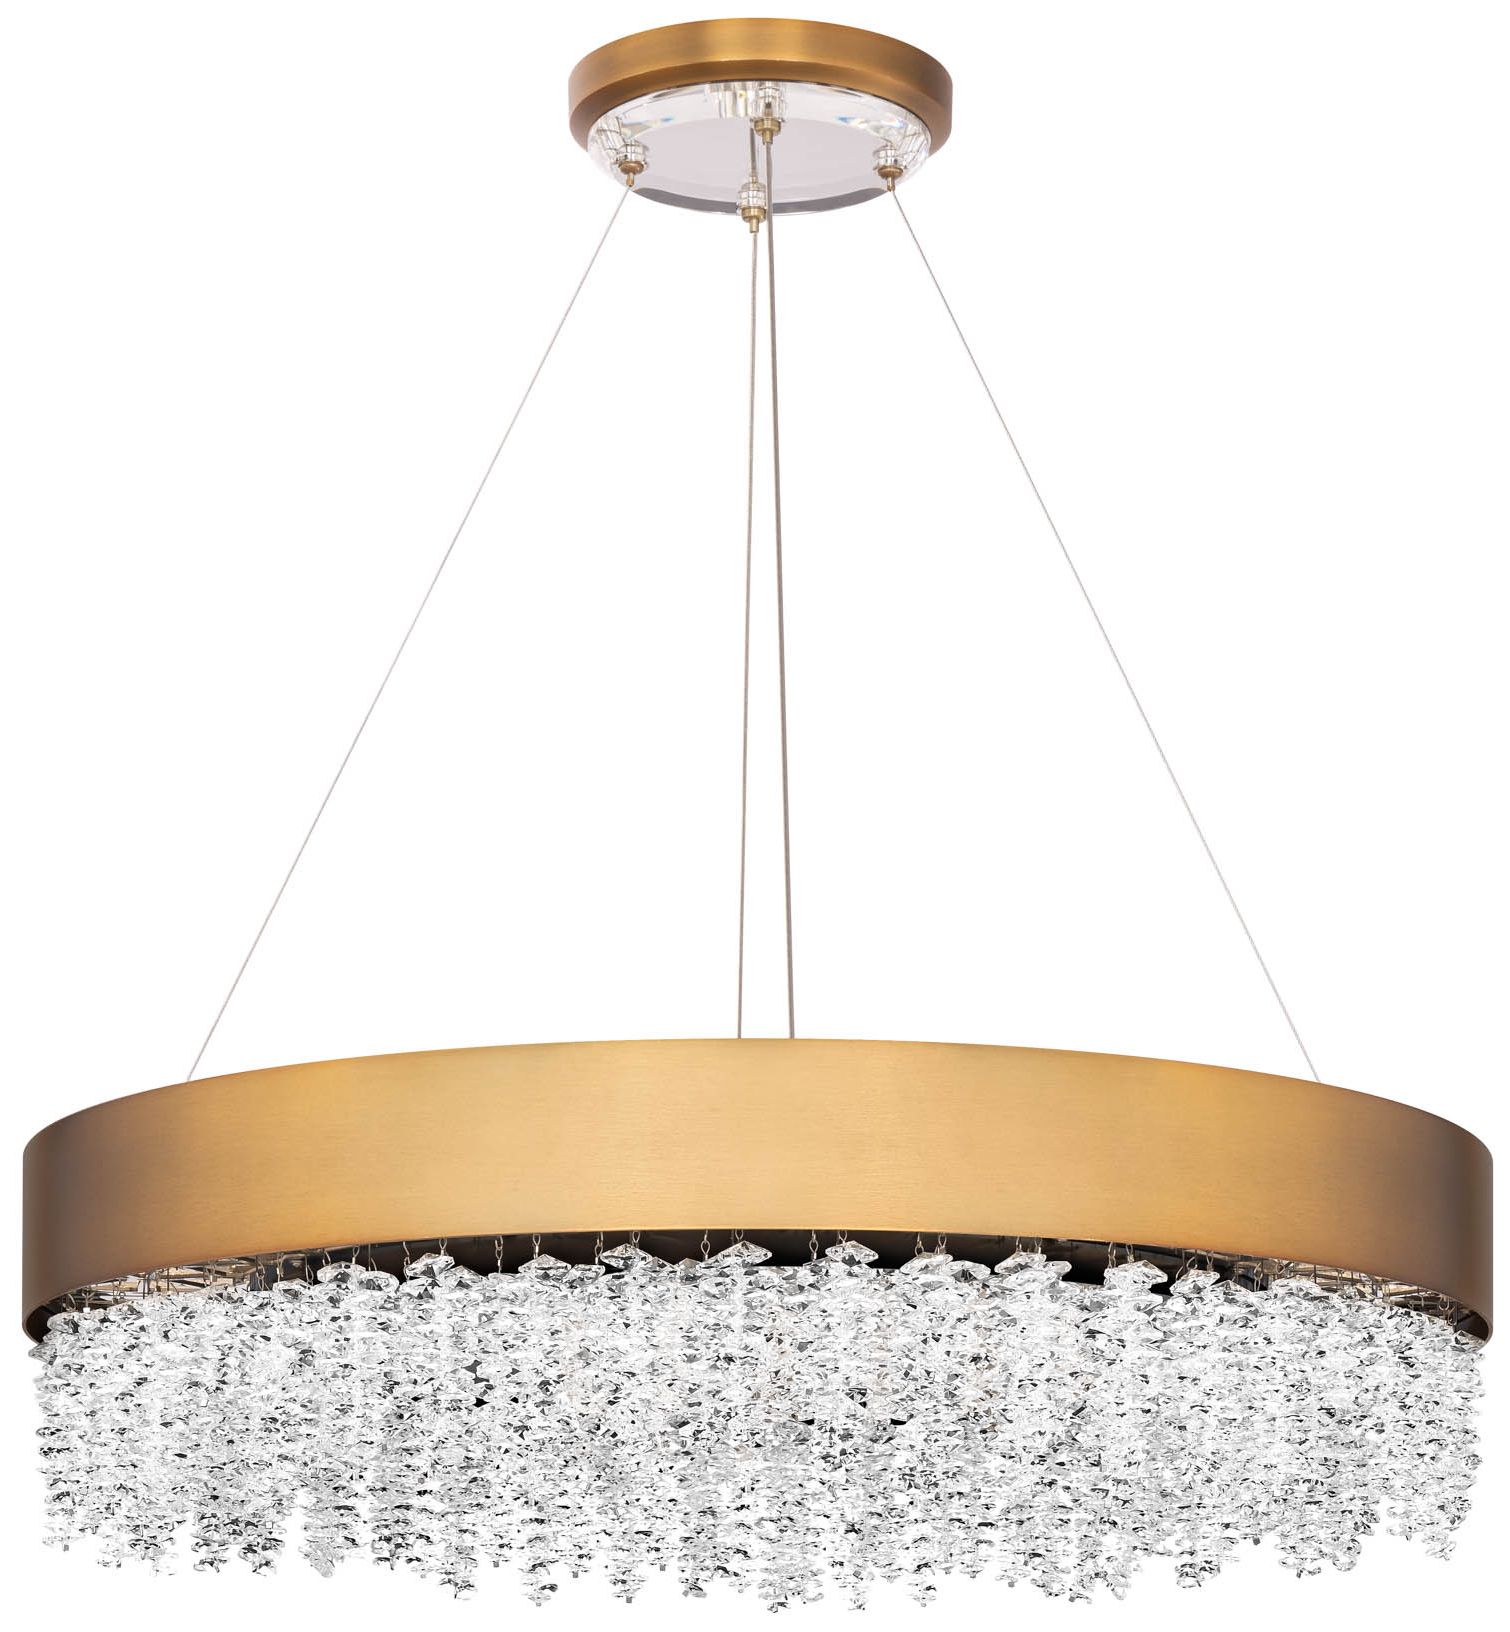 Soleil 7"H x 26"W 1-Light Crystal Pendant in Aged Brass